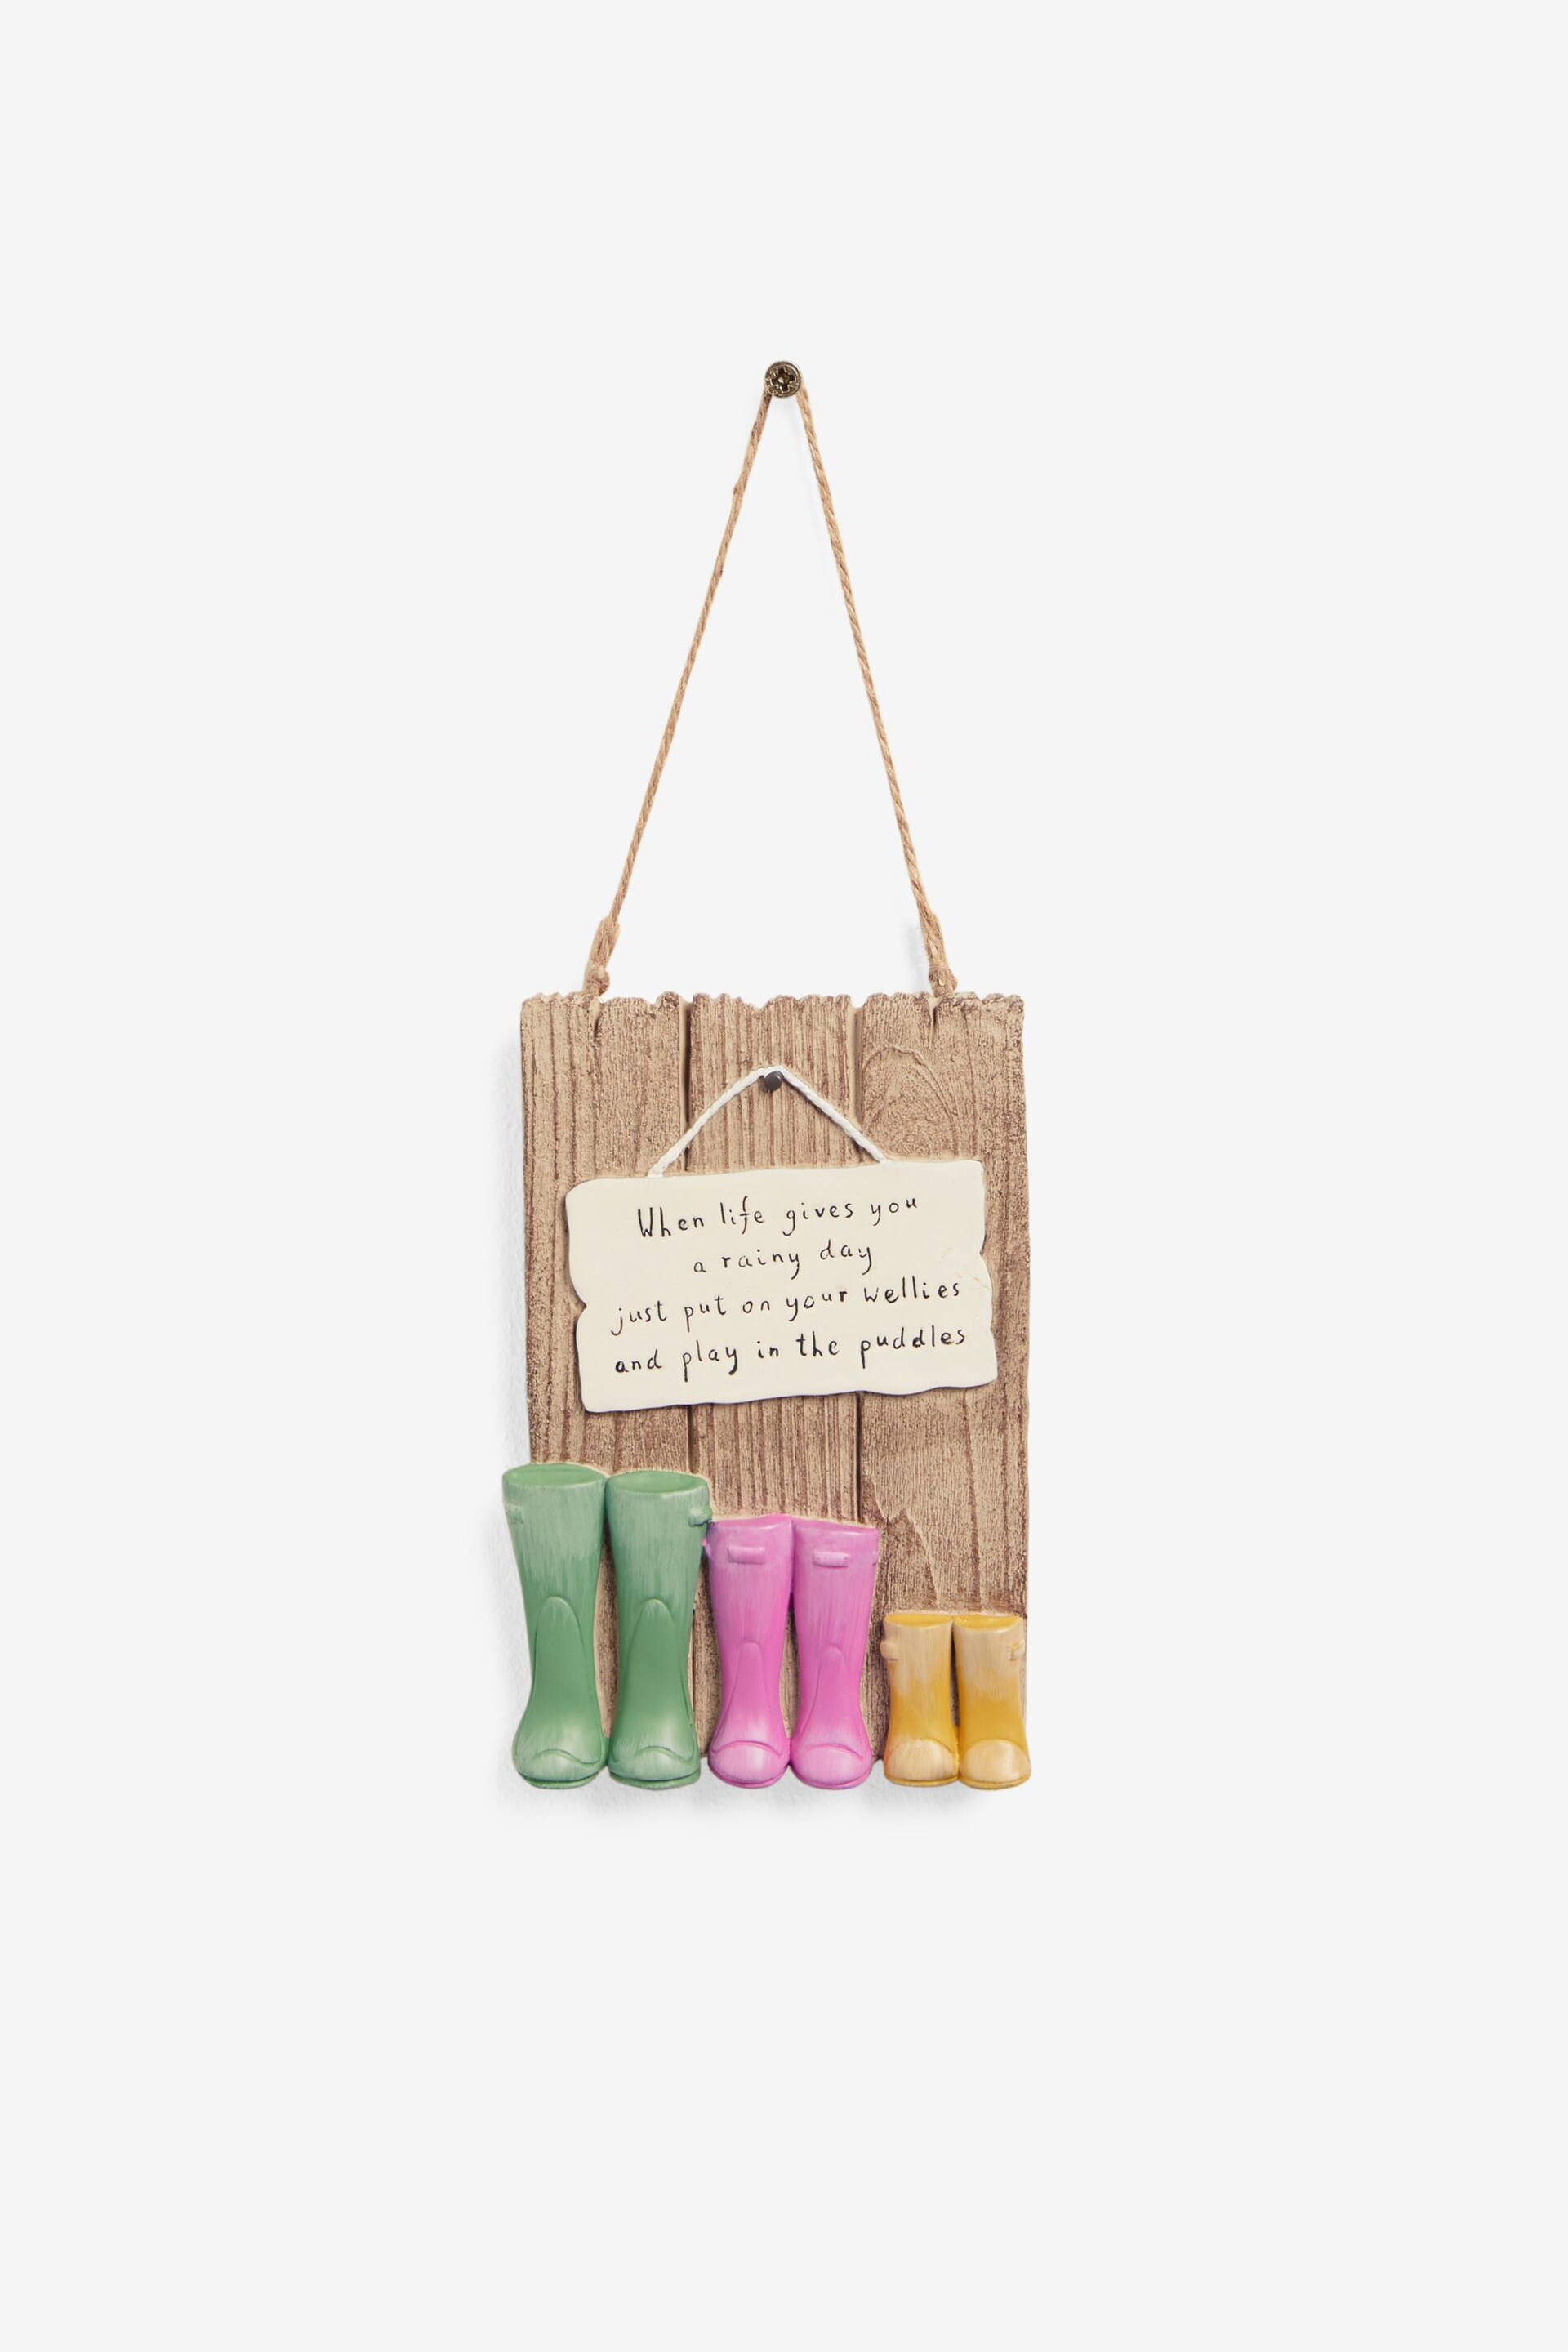 Bright Welly Boot Hanging Decoration - Image 4 of 5